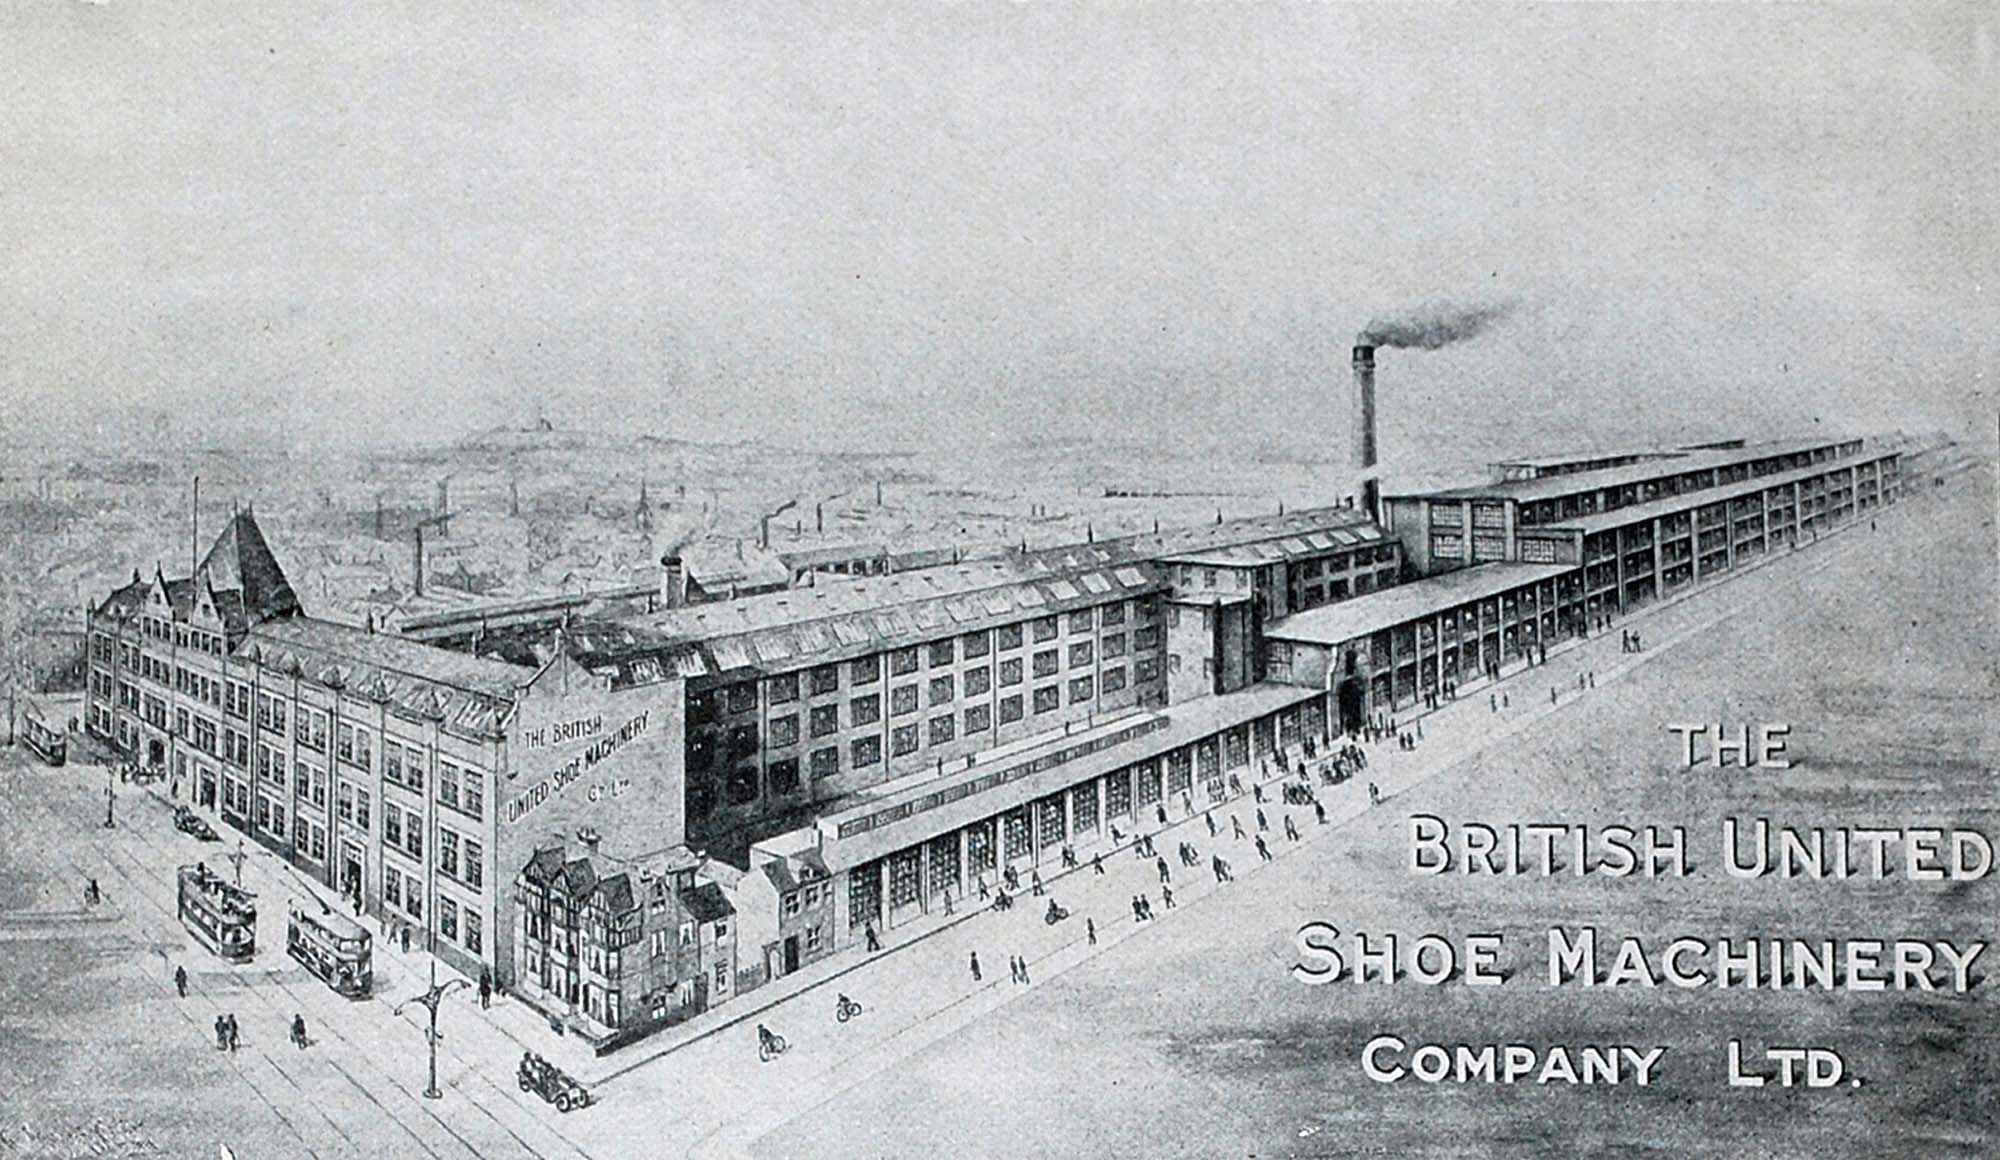 Detail of an advert for the The British United Shoe machinery Company Ltd. Showing their huge factory complex on Belgrave Road - 